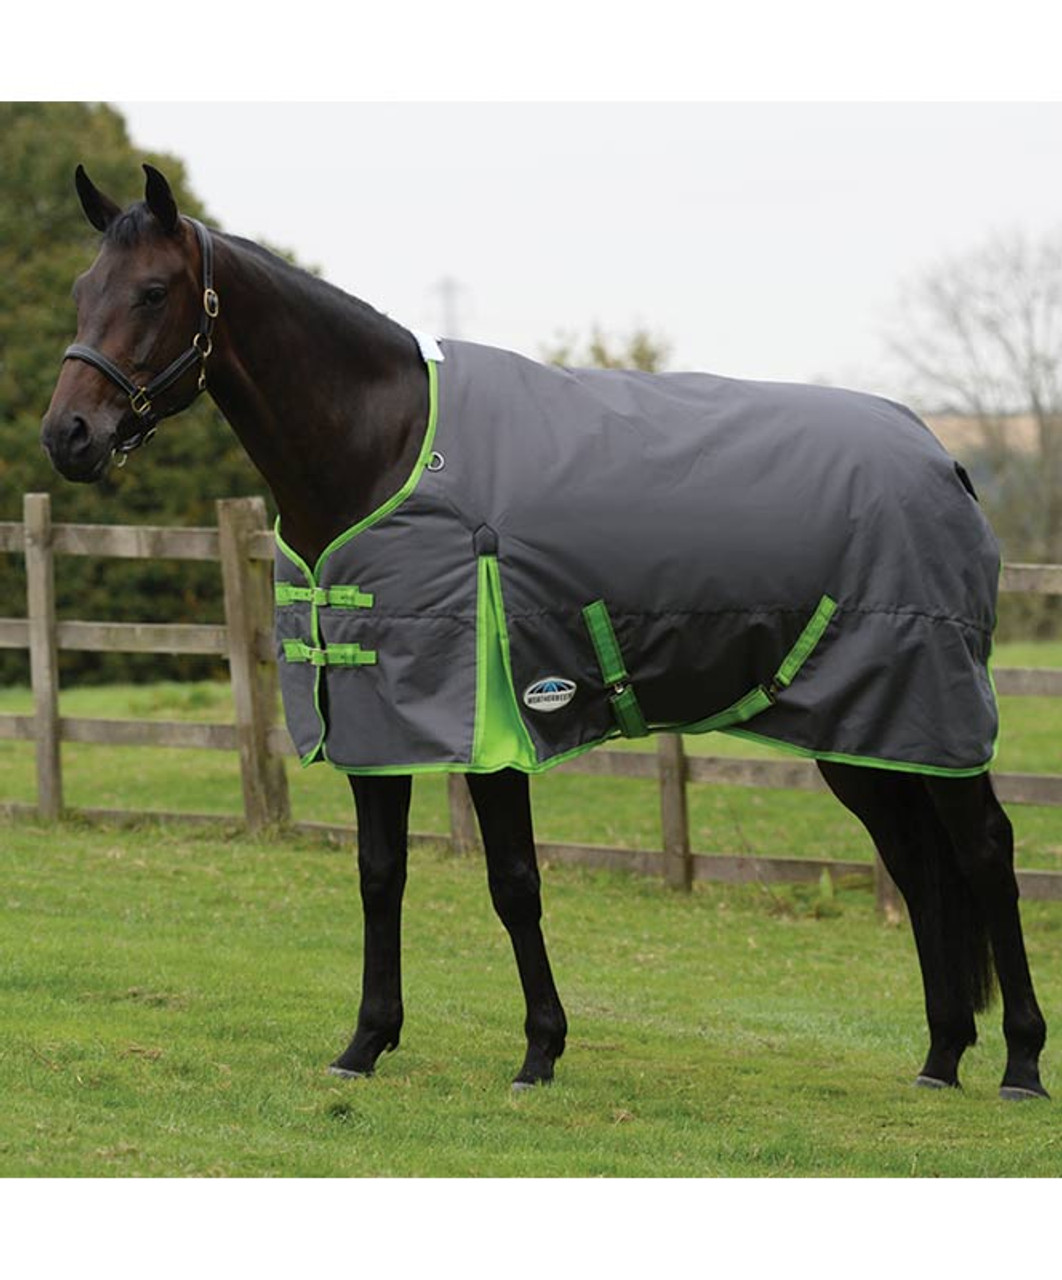 TGW RIDING Comfitec Essential Standard Neck Horse Turnout Sheet 1200D Waterproof and Breathable Horse Rain Sheet Lite More Colors 